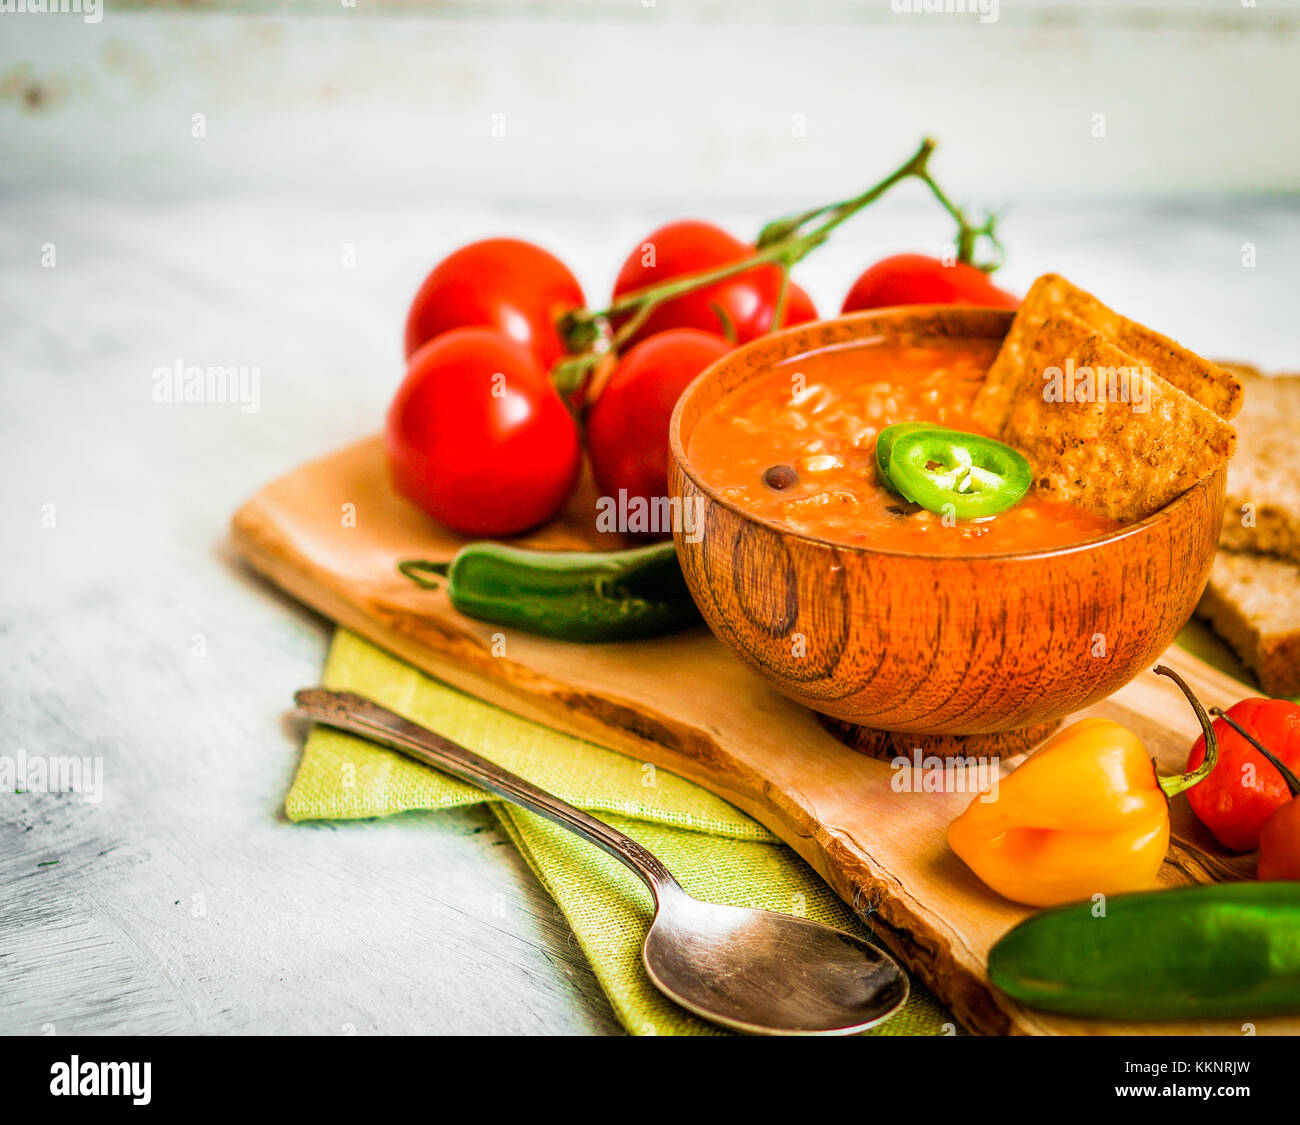 Hot And Spicy Fresh Made Mexican Chili Soup On Rustic Background Stock Photo